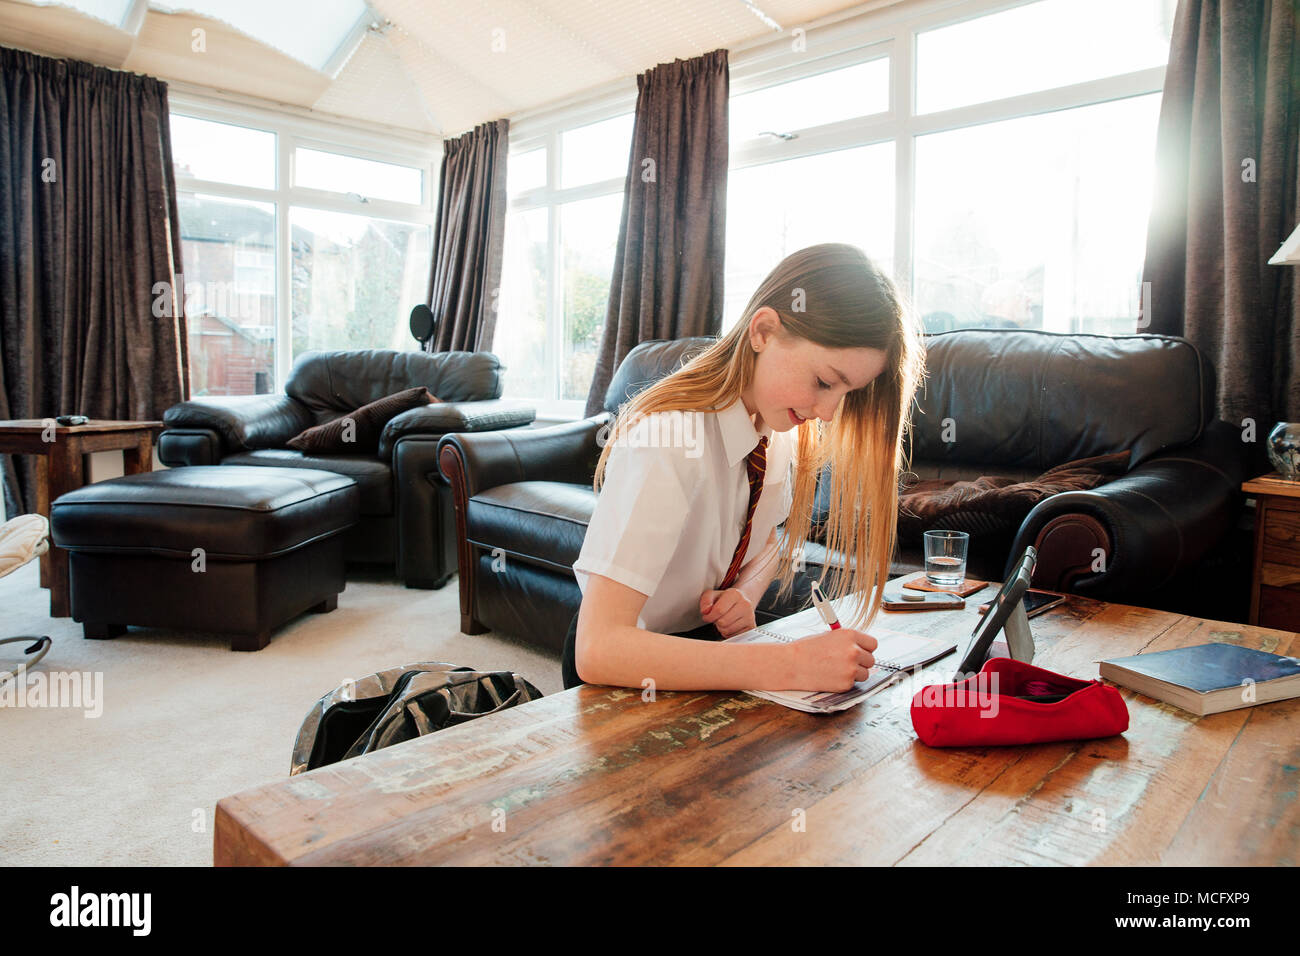 Girl is doing homework in the living room if her home. She is writing in a book, using a digital tablet to study. Stock Photo